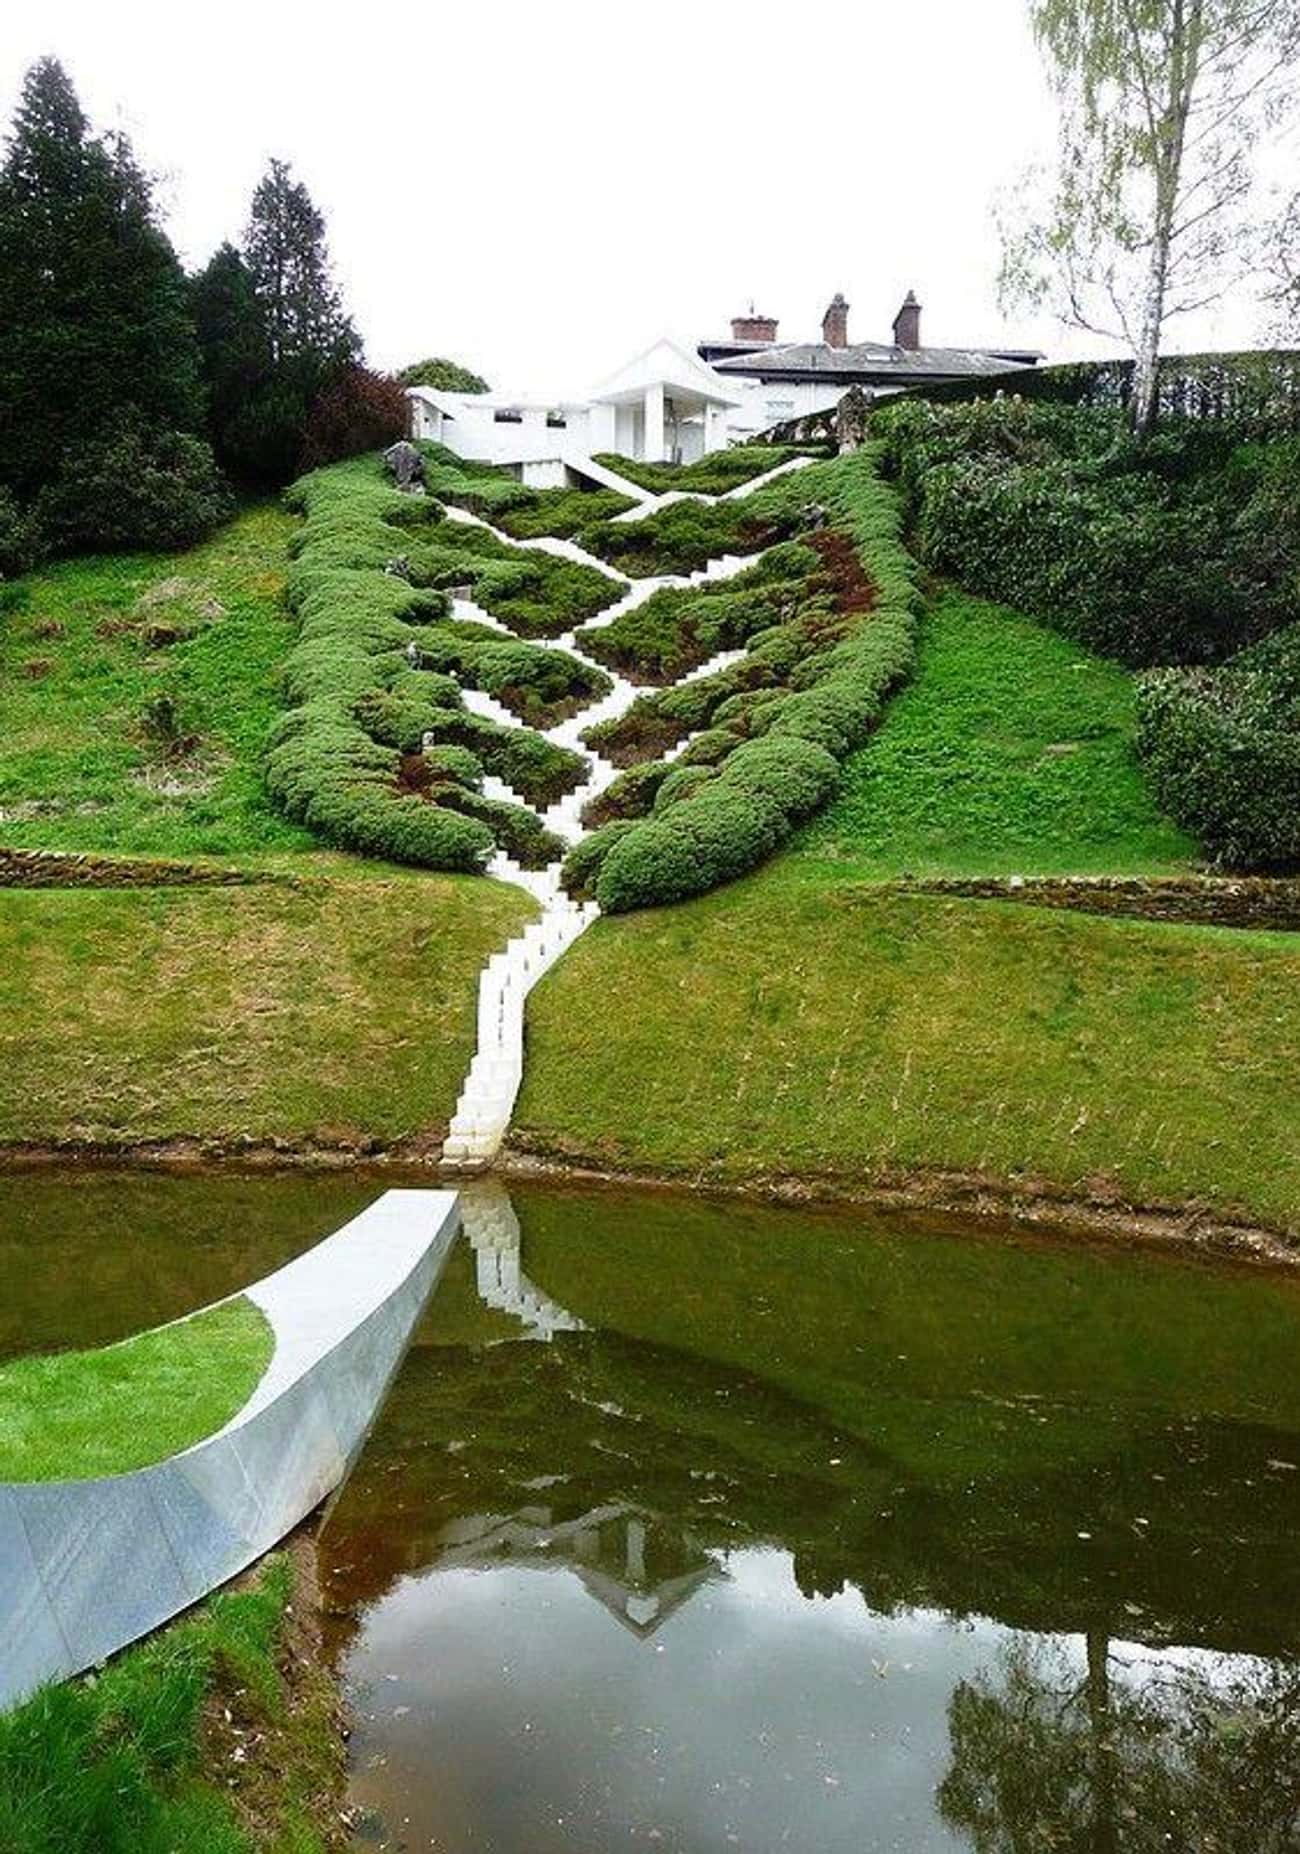 The Cascading Universe Garden of Cosmic Speculation, Dumfries, Scotland